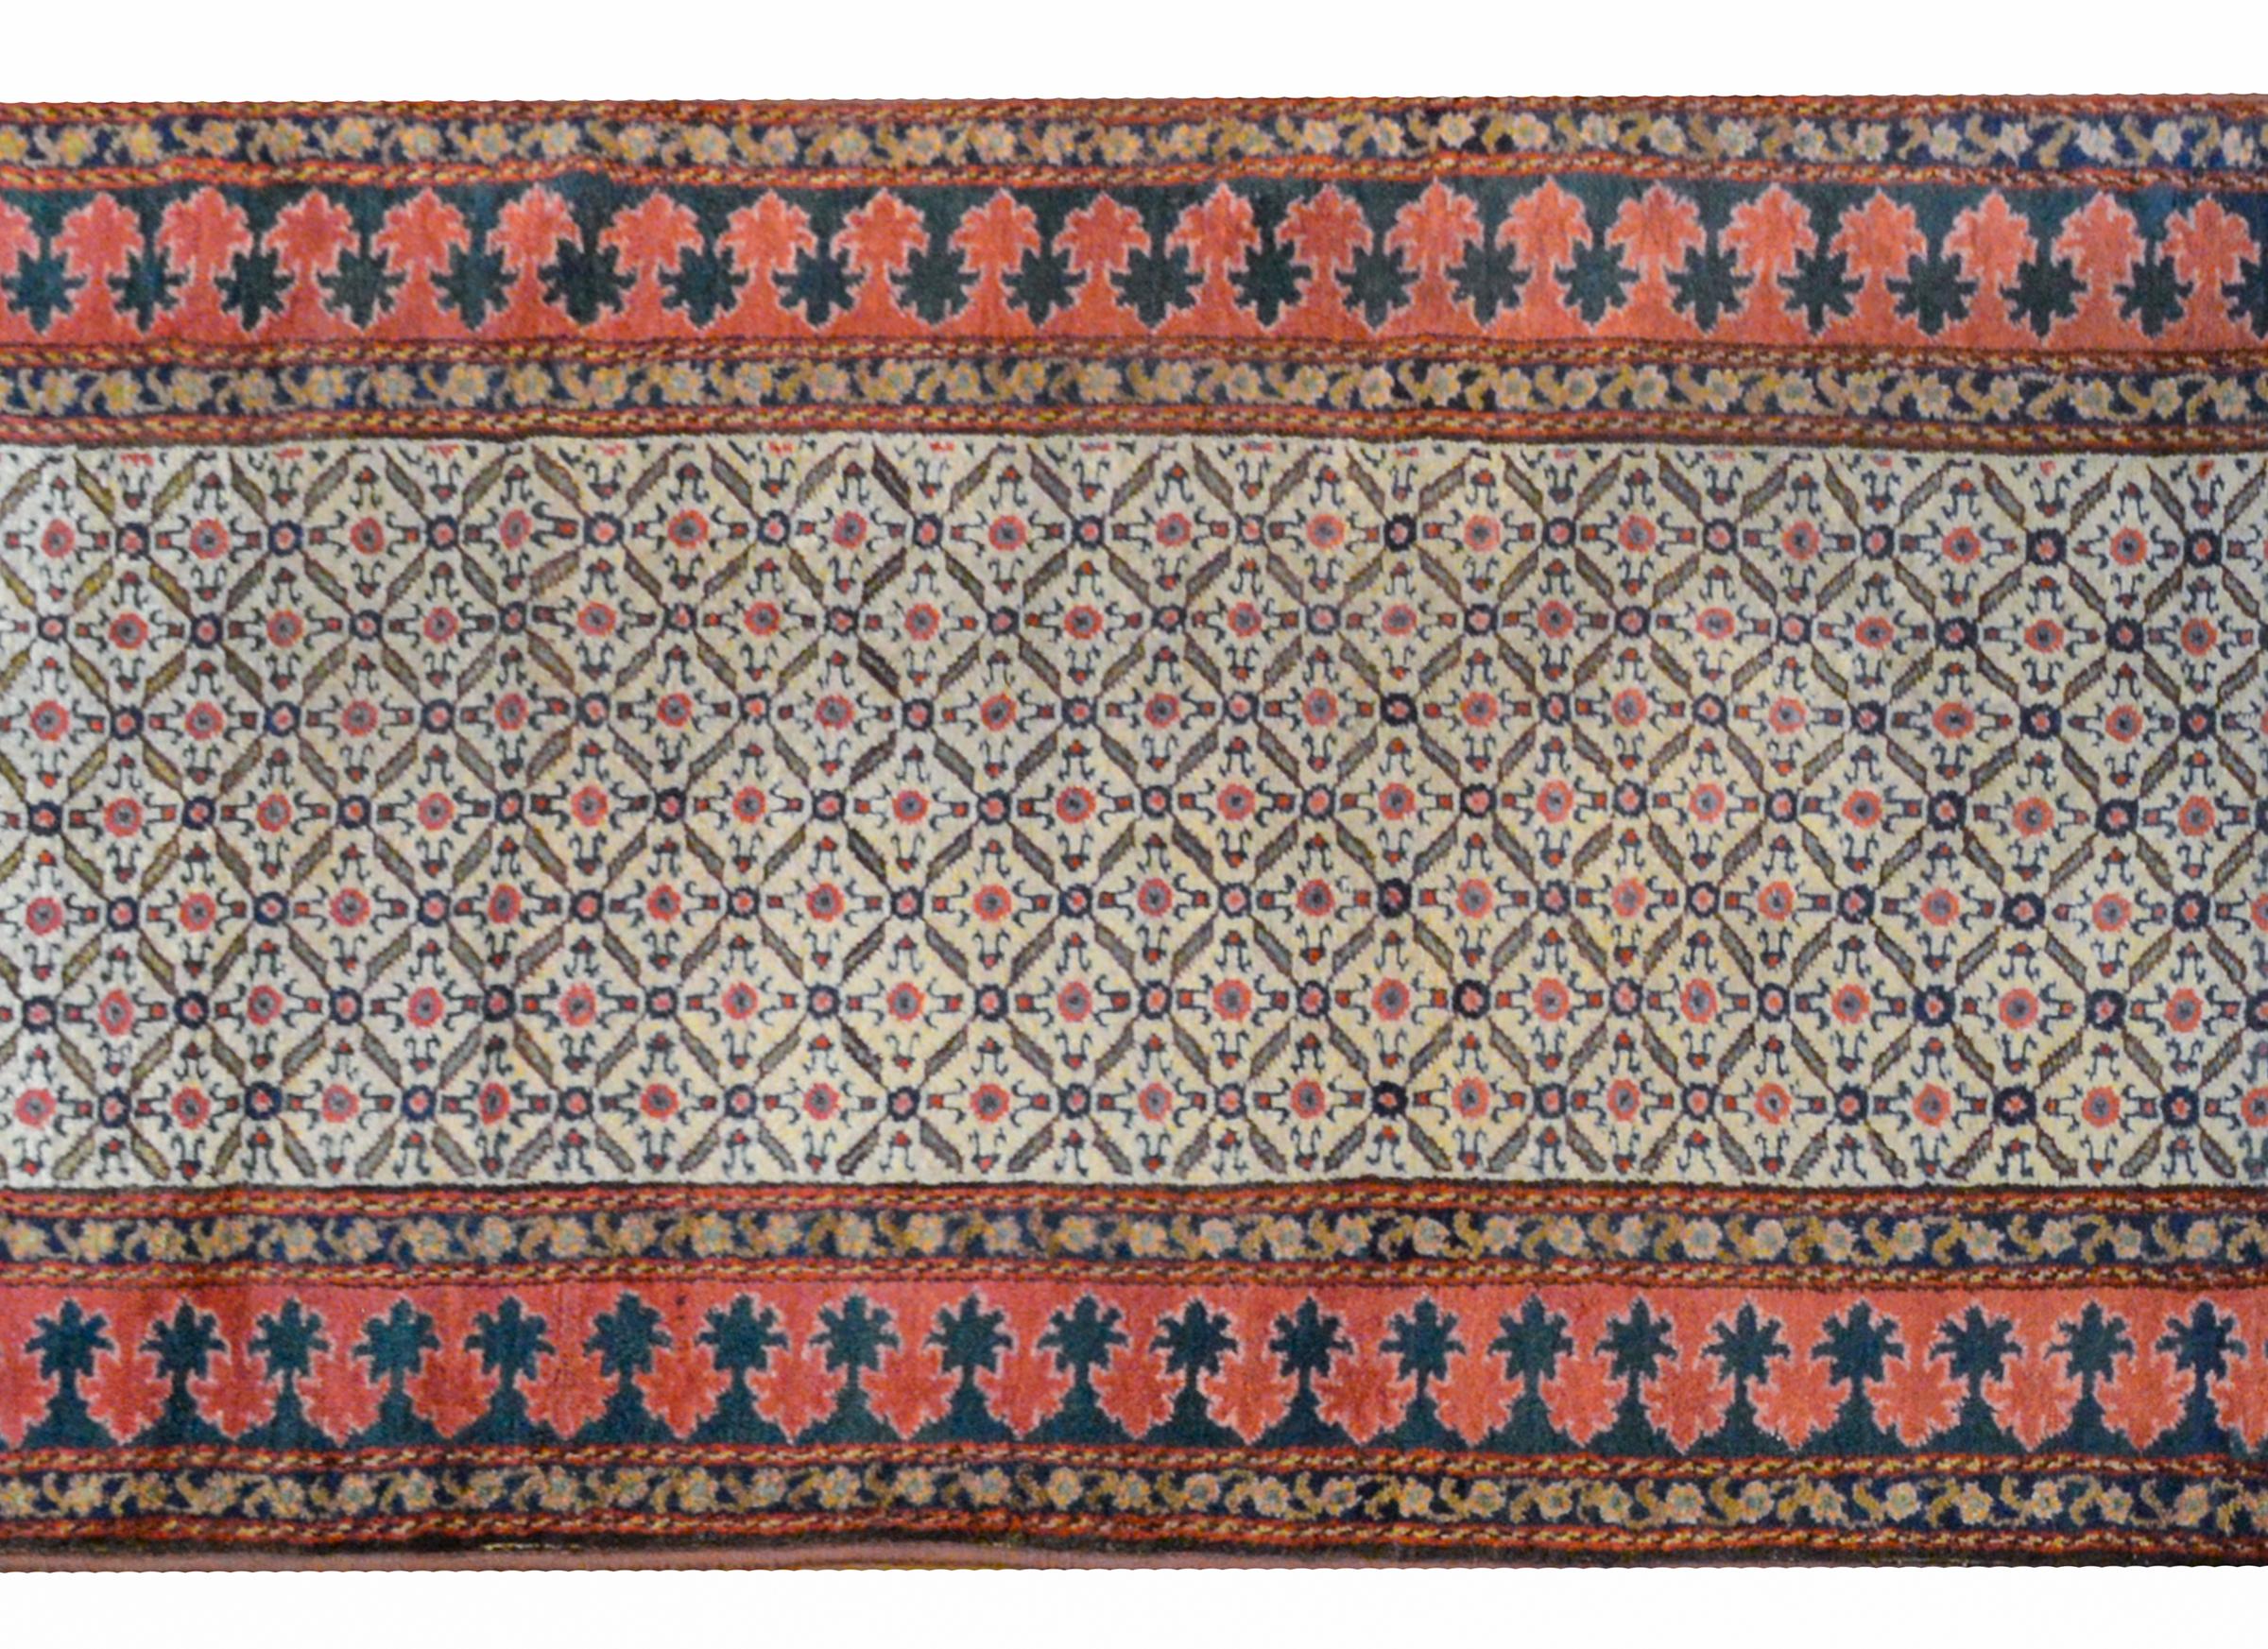 An exceptional early 20th century Malayer runner with an all-over trellis and floral pattern woven in crimson, indigo, and pale yellow, surrounded by a wide border of alternating crimson and indigo flowers flanked by a pair of petite floral